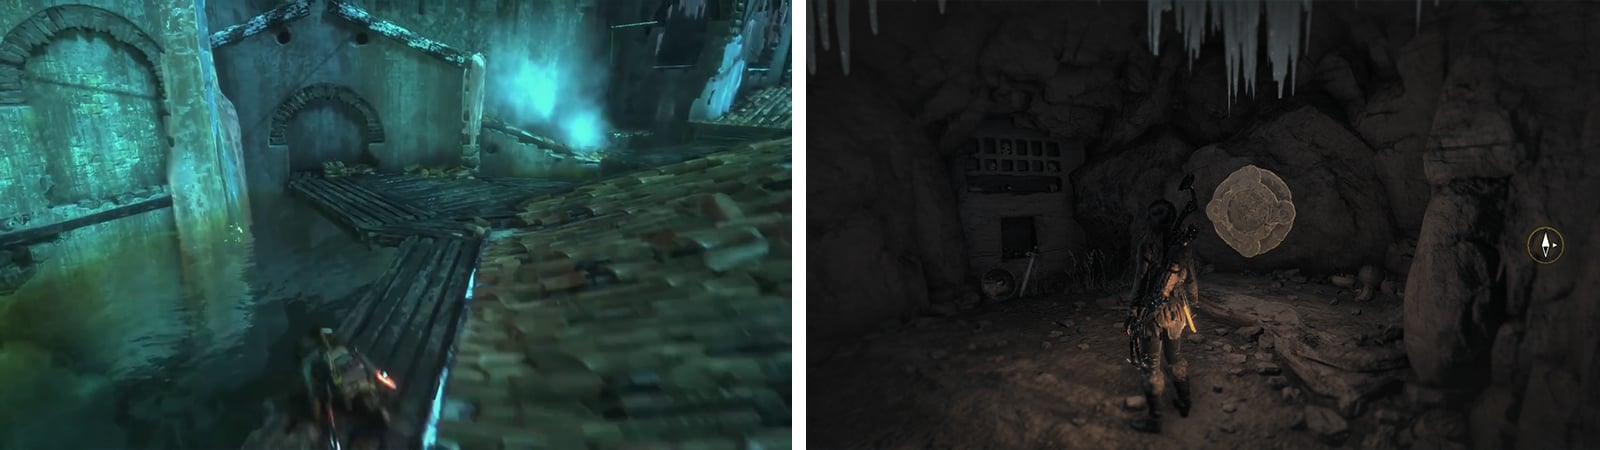 Enter the water beneath the trebuchet (left) to find an underwater entrance to a Crypt. Inside youll find Mural 02 (right).